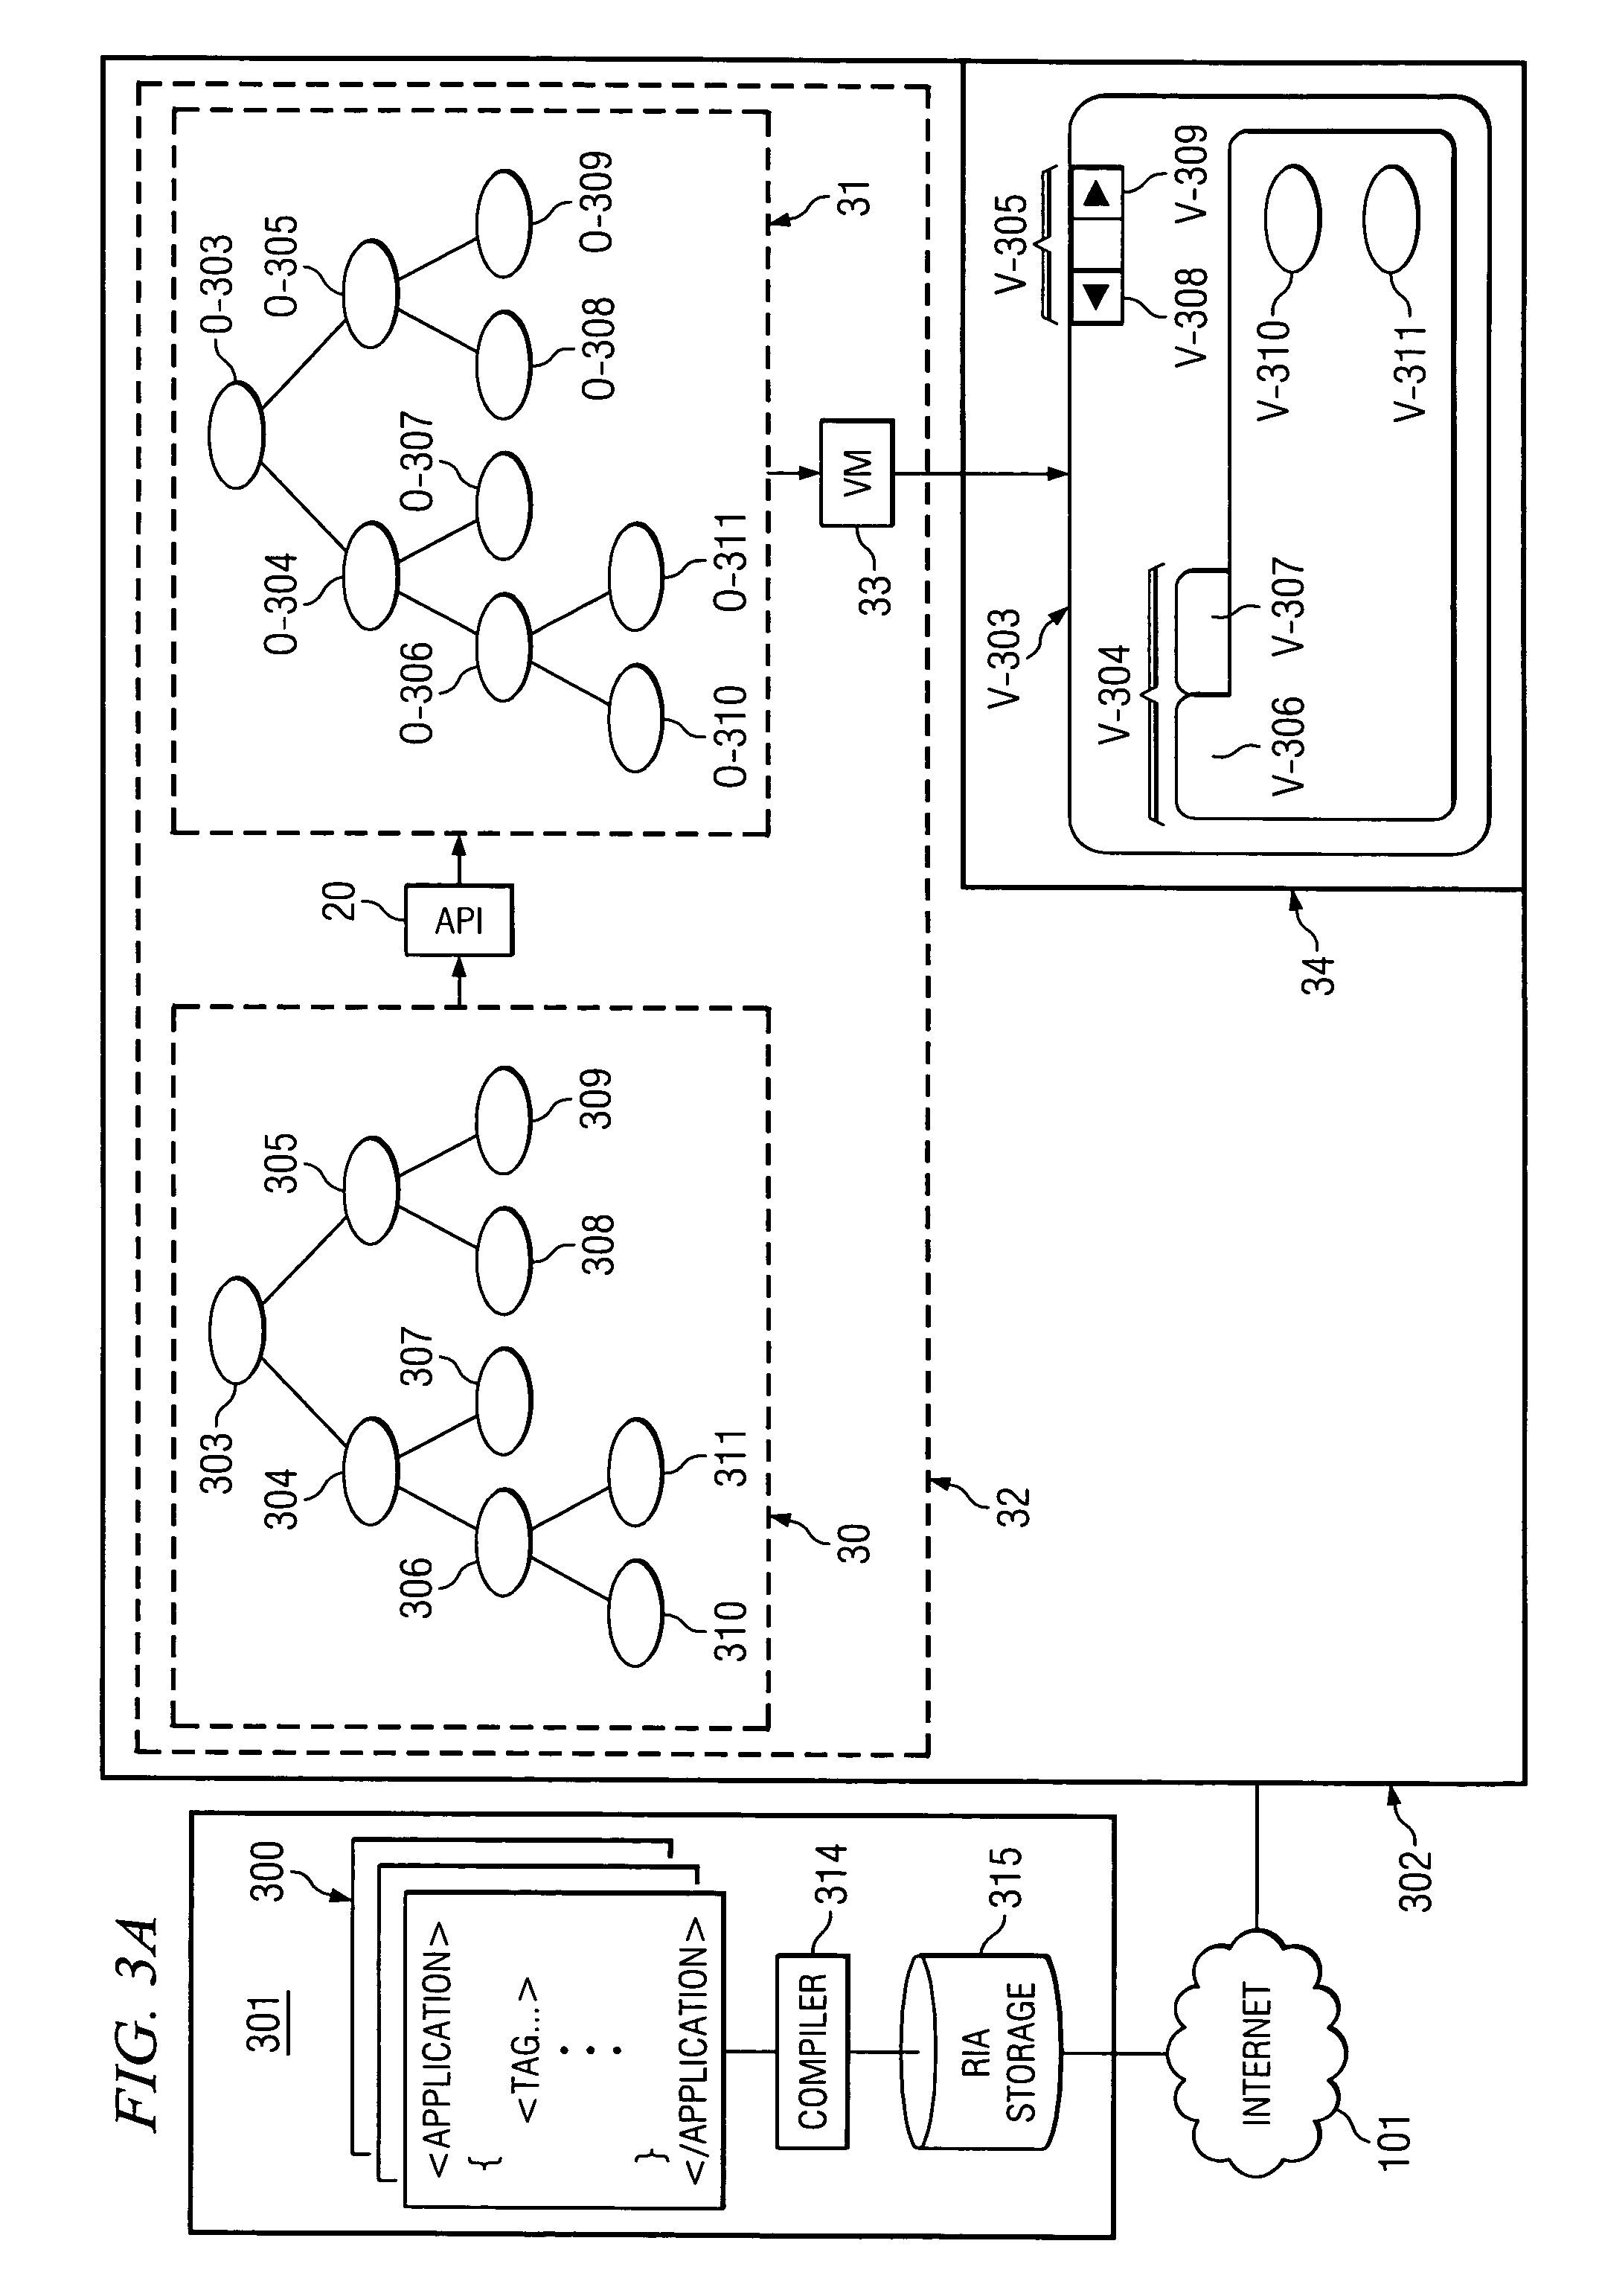 System and method for managing instantiation of interface elements in rich internet applications